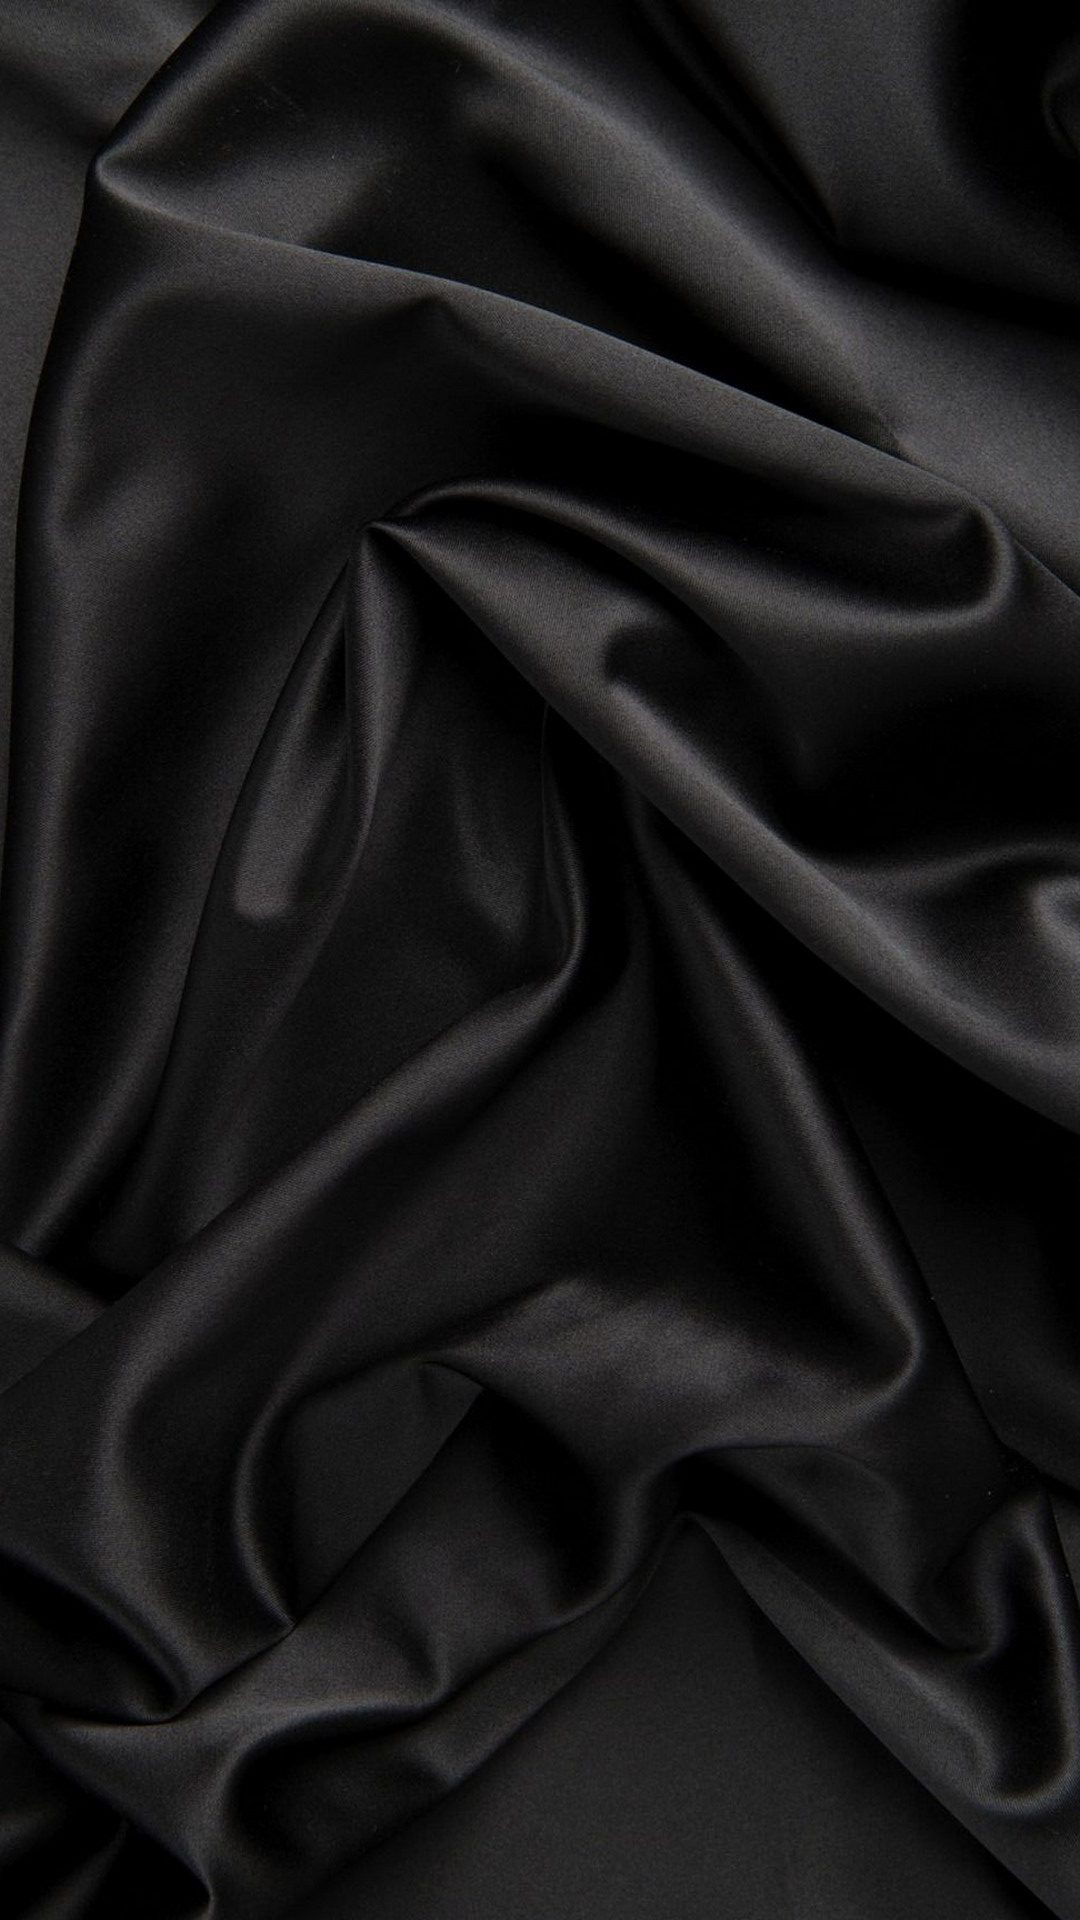 Black Silk iPhone Wallpaper Home Screen With high-resolution 1920X1080 pixel. You can set as wallpaper for Apple iPhone X, XS Max, XR, 8, 7, 6, SE, iPad. Enjoy and share your favorite HD wallpapers and background images